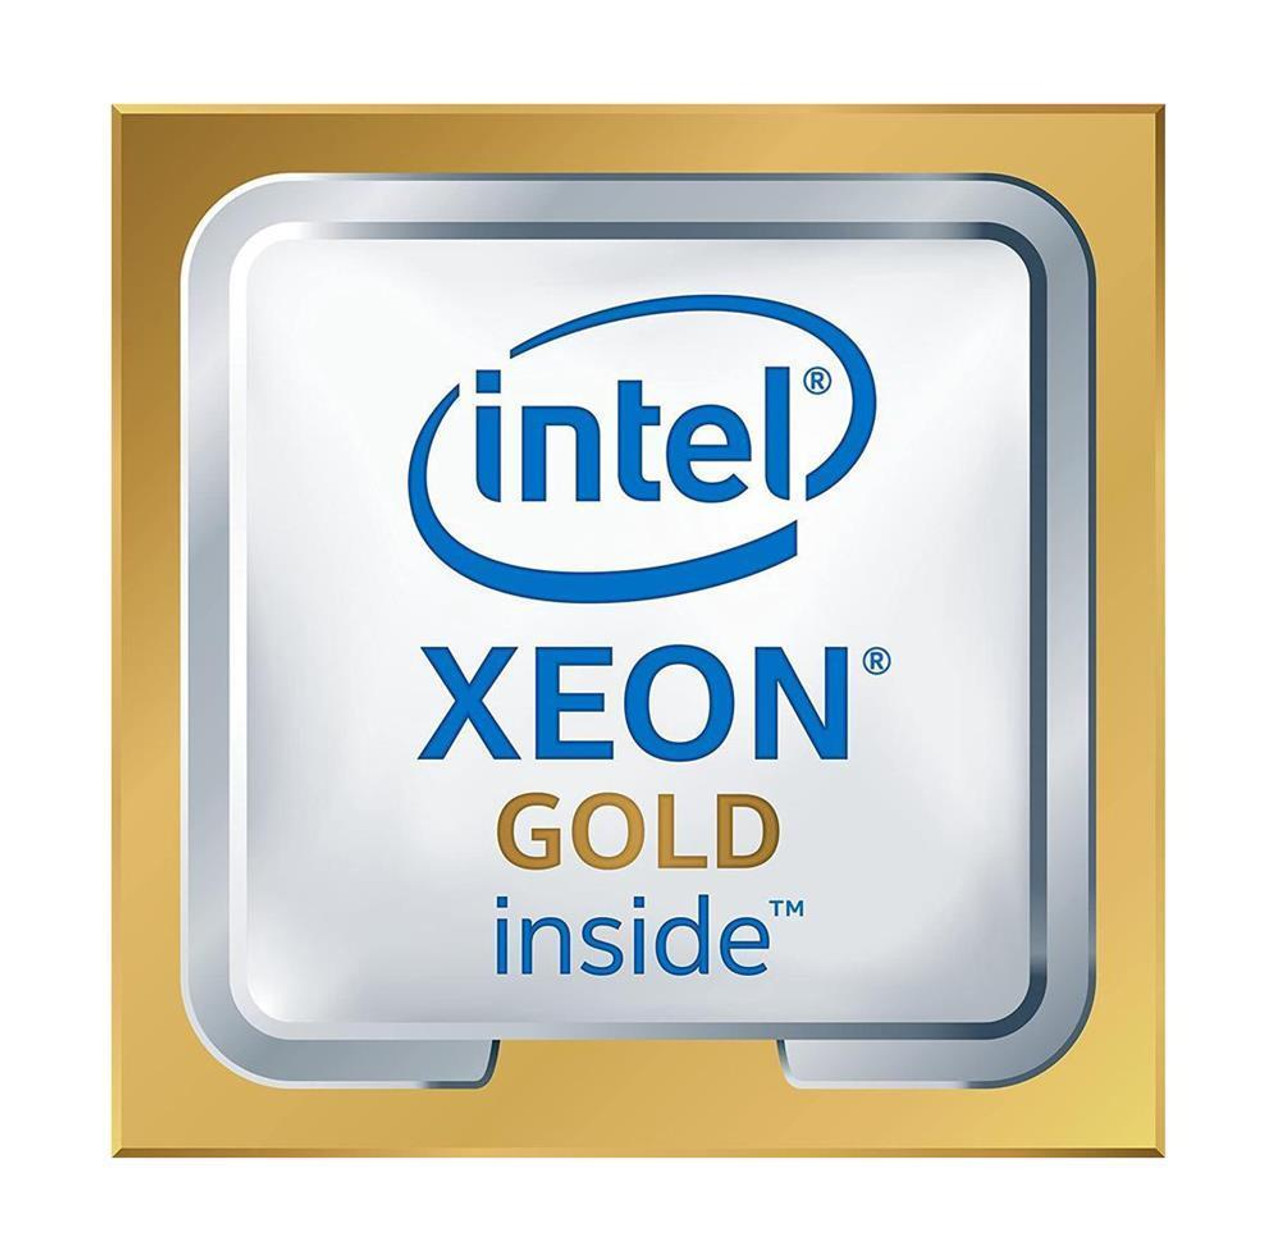 Lenovo 2.10GHz 36MB L3 Cache Socket FCLGA4189 Intel Xeon Gold 5318S 24-Core Processor Upgrade for Think System ST650 V2